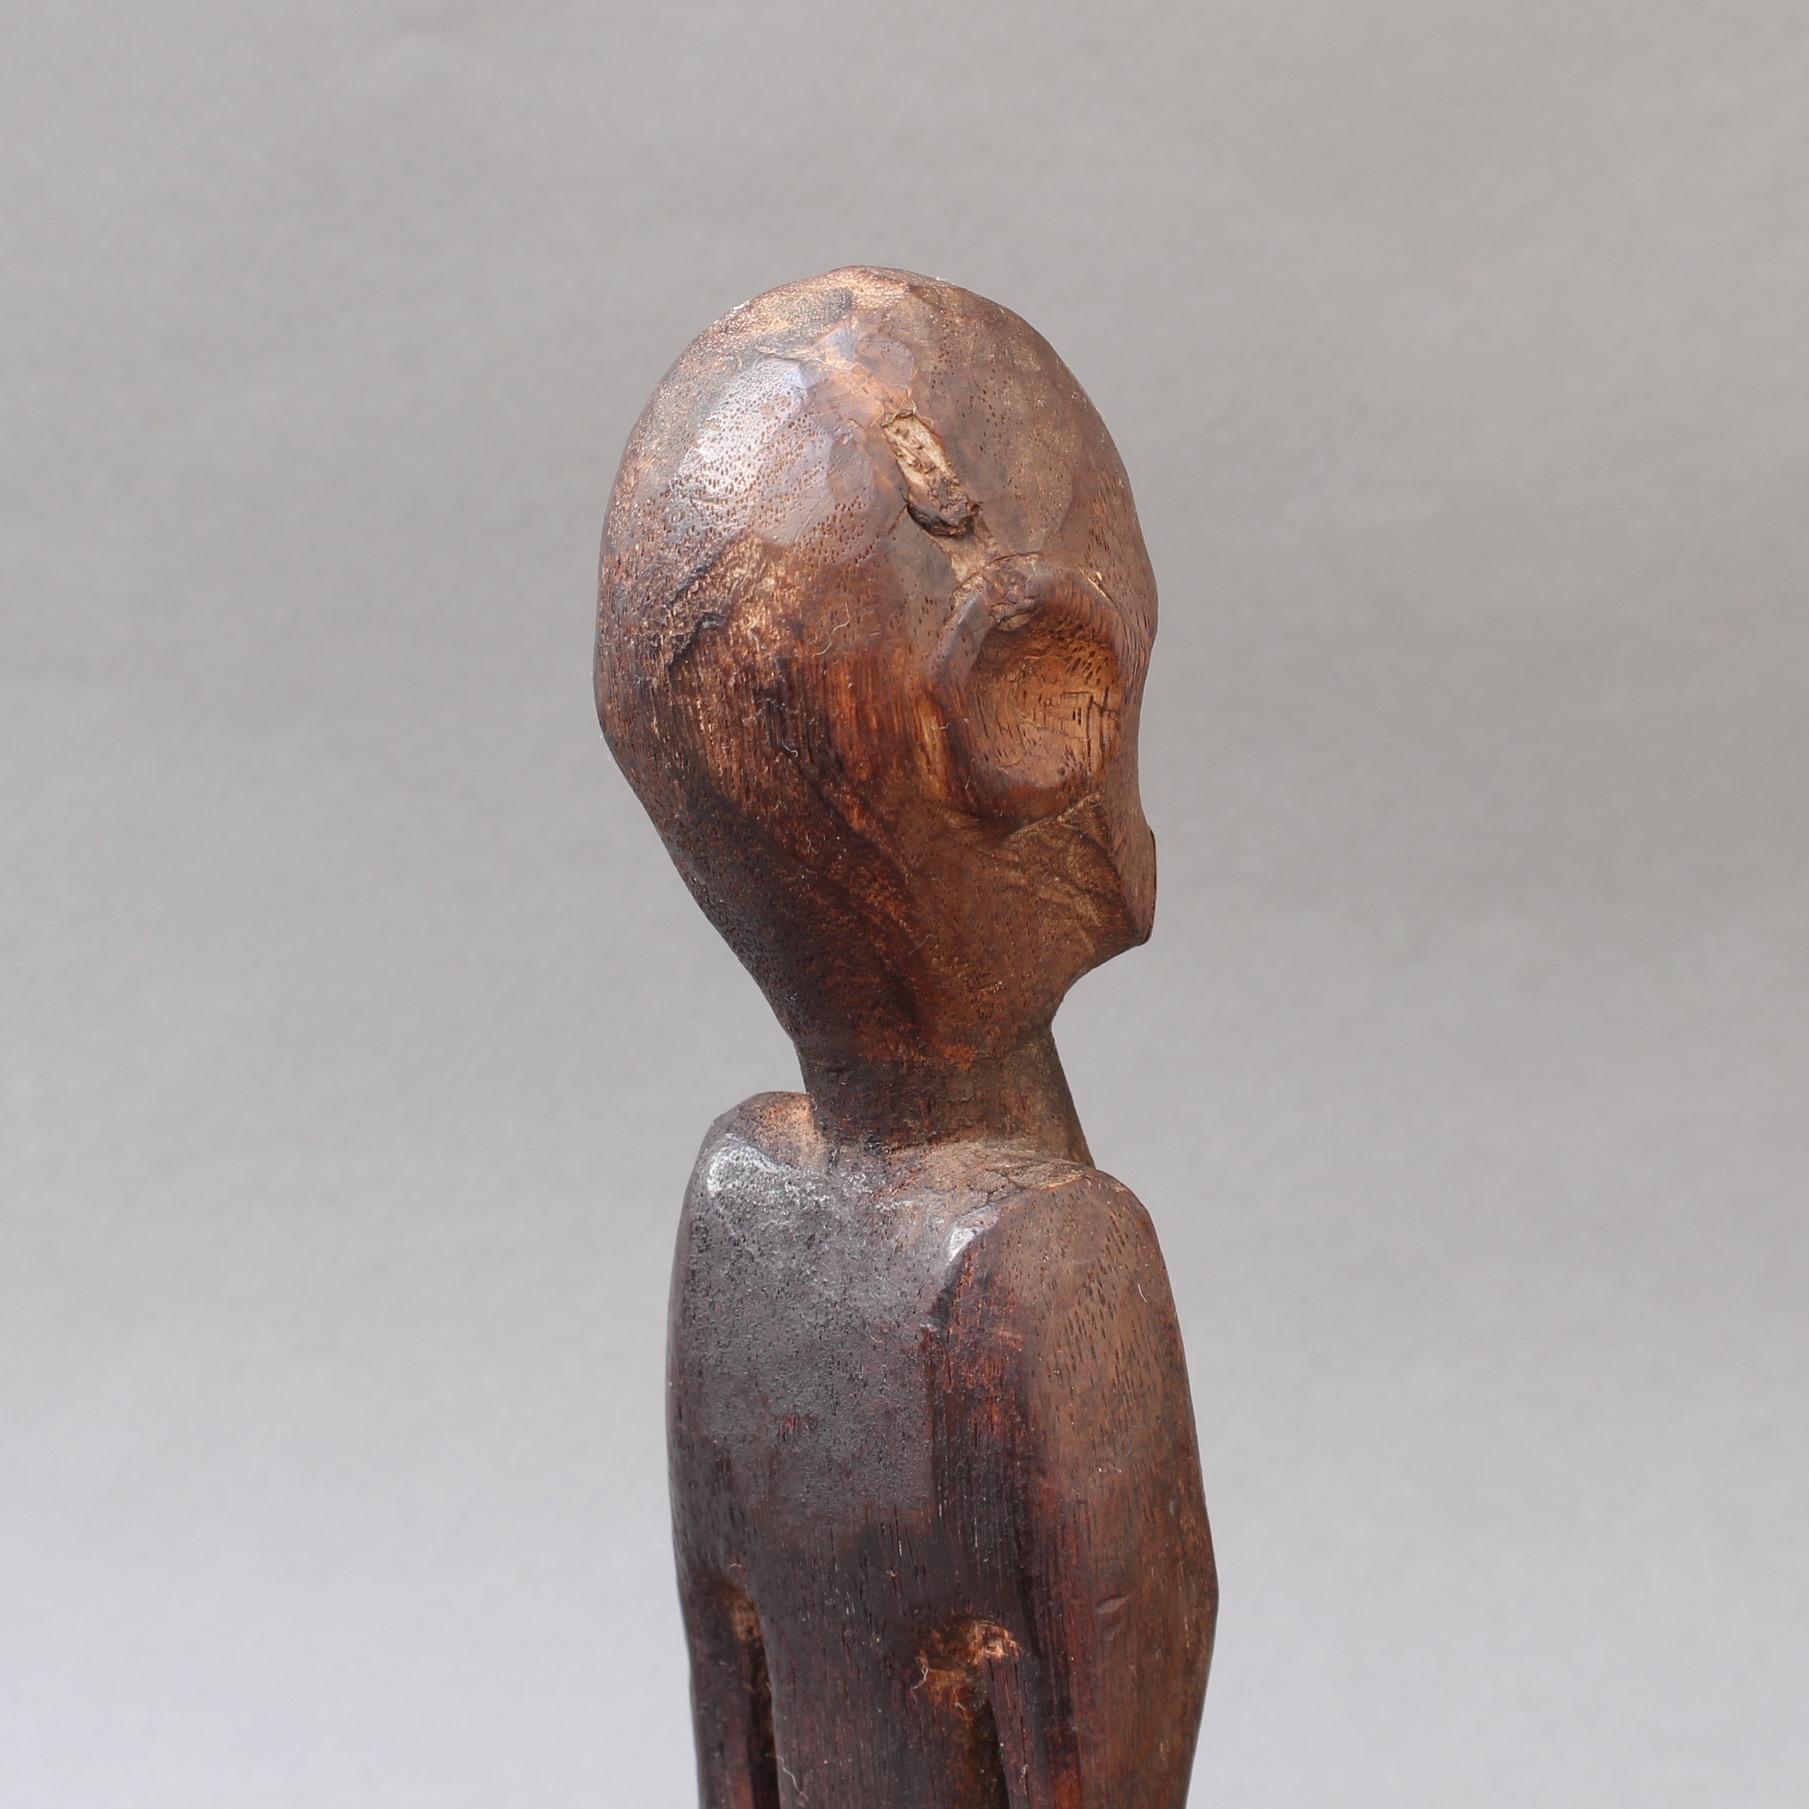 Wooden Sculpture or Carving of Sitting Figure from Sumba Island, Indonesia 4